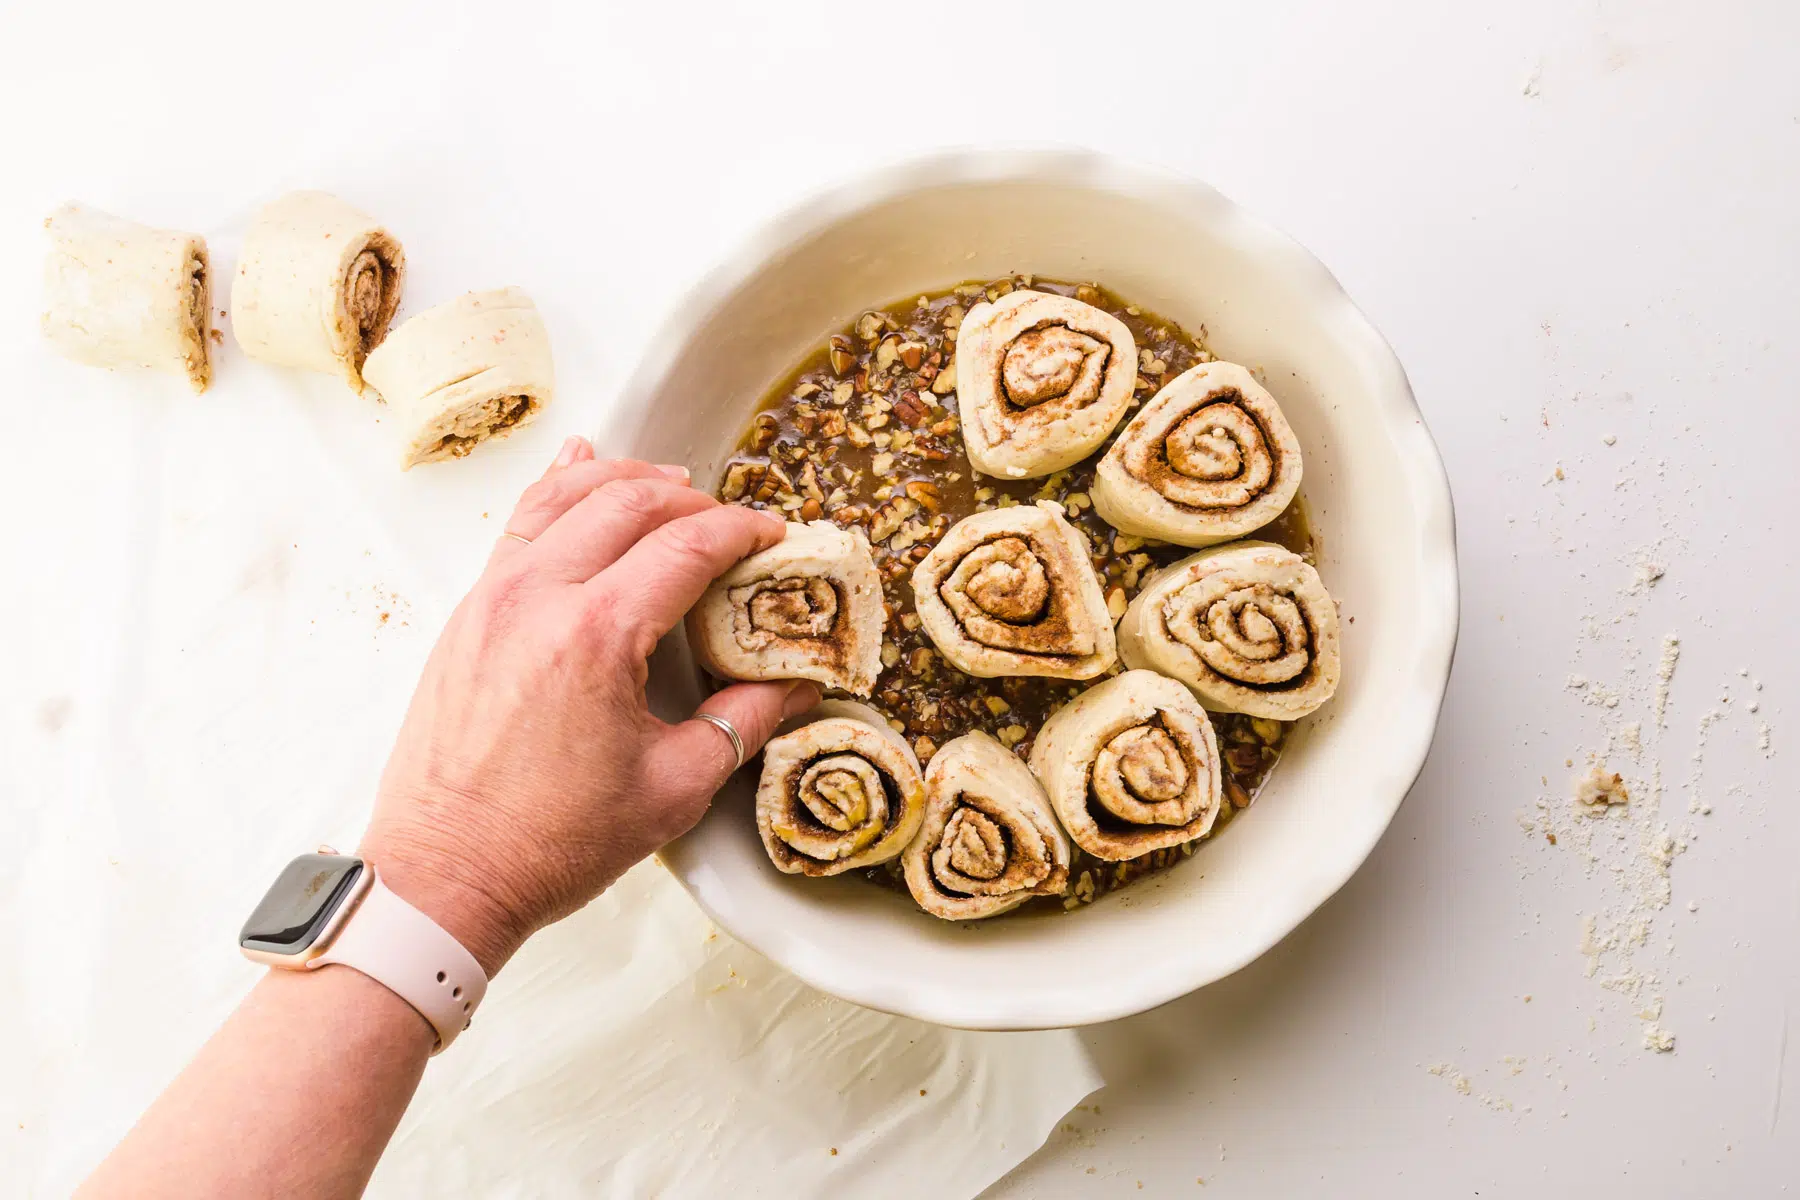 A hand places a cinnamon roll in a white pan with more rolls. There are more cut rolls on the left.